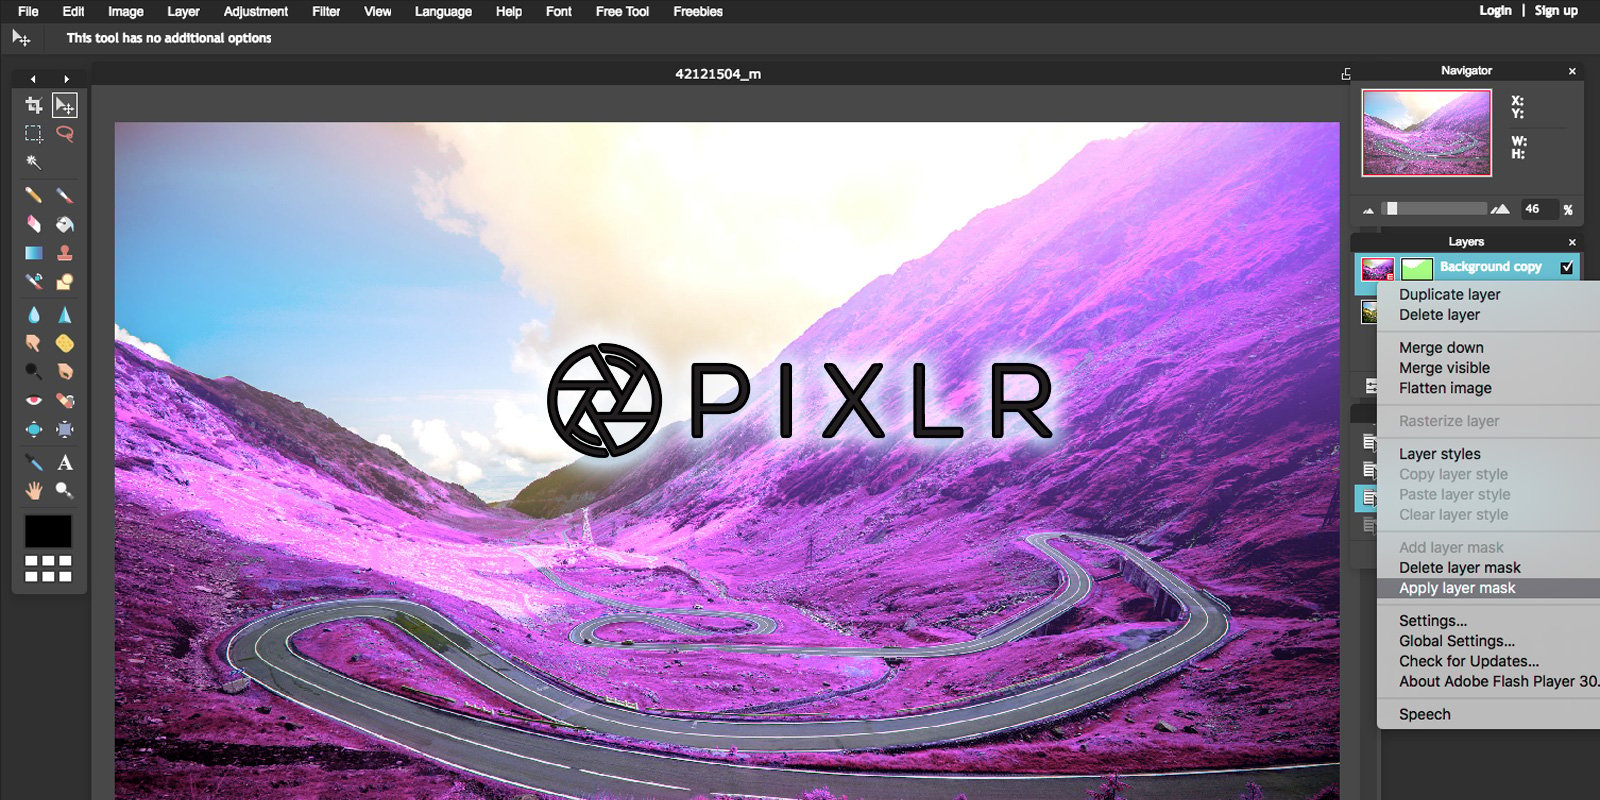 Hacker posts 1.9 million Pixlr user records for free on forum